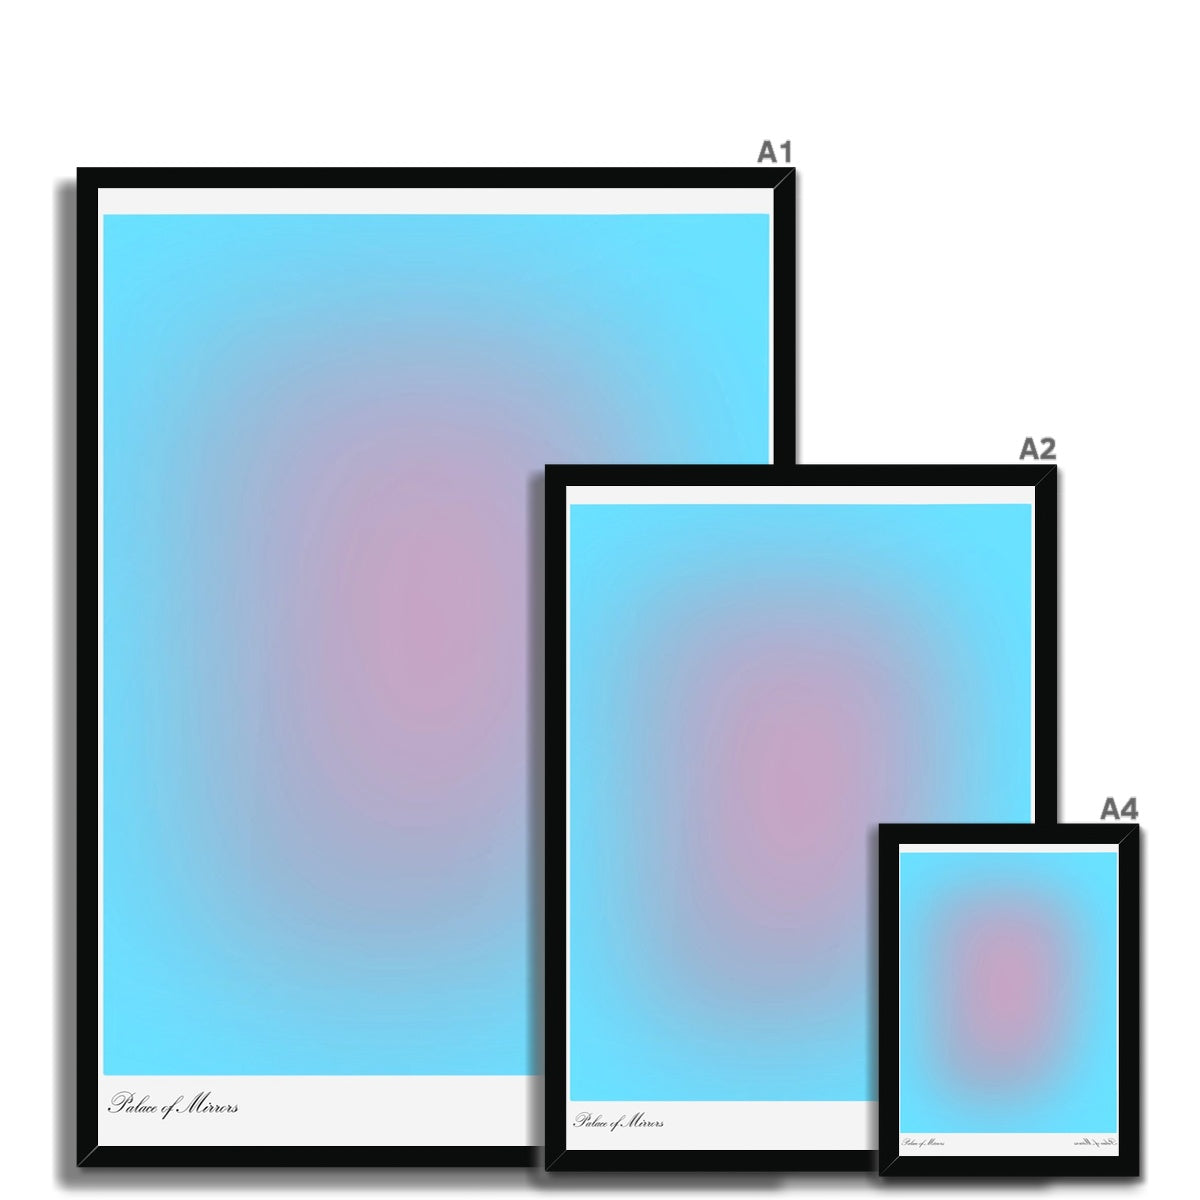 Dreamy gradient aura wall art prints featuring color clouds of pastel gradients. The rectangular layers of light and shadow appear to recede similar to an infinity mirror. Our colorful aura gradient posters are a stunning addition to any home.